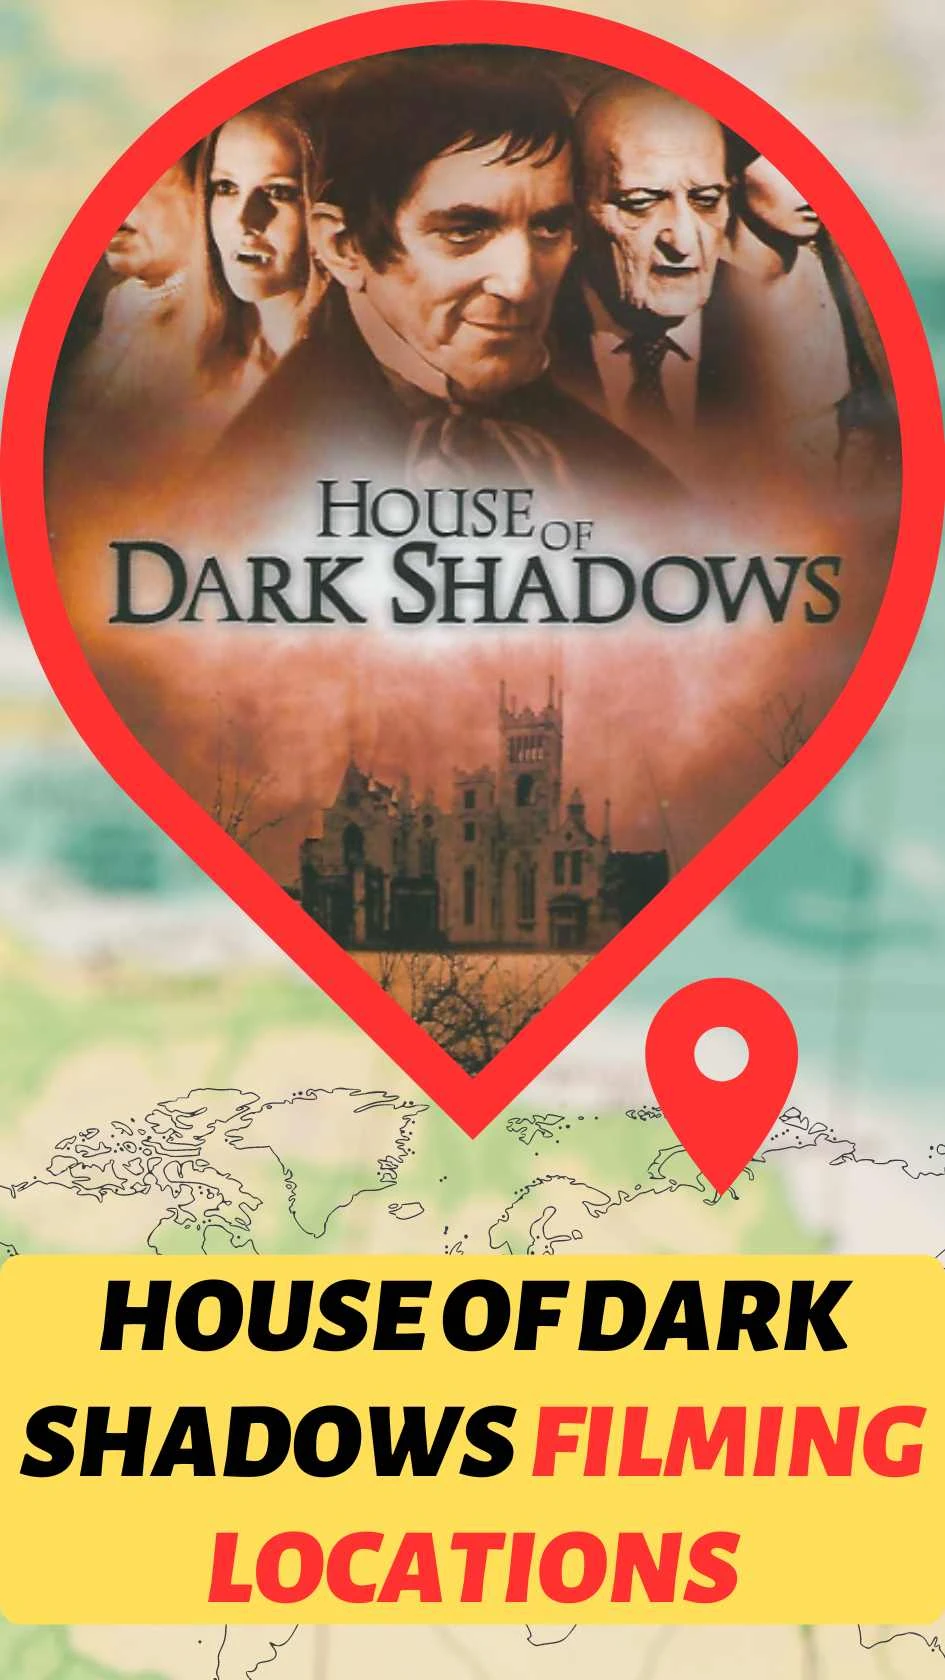 House of Dark Shadows Filming Locations